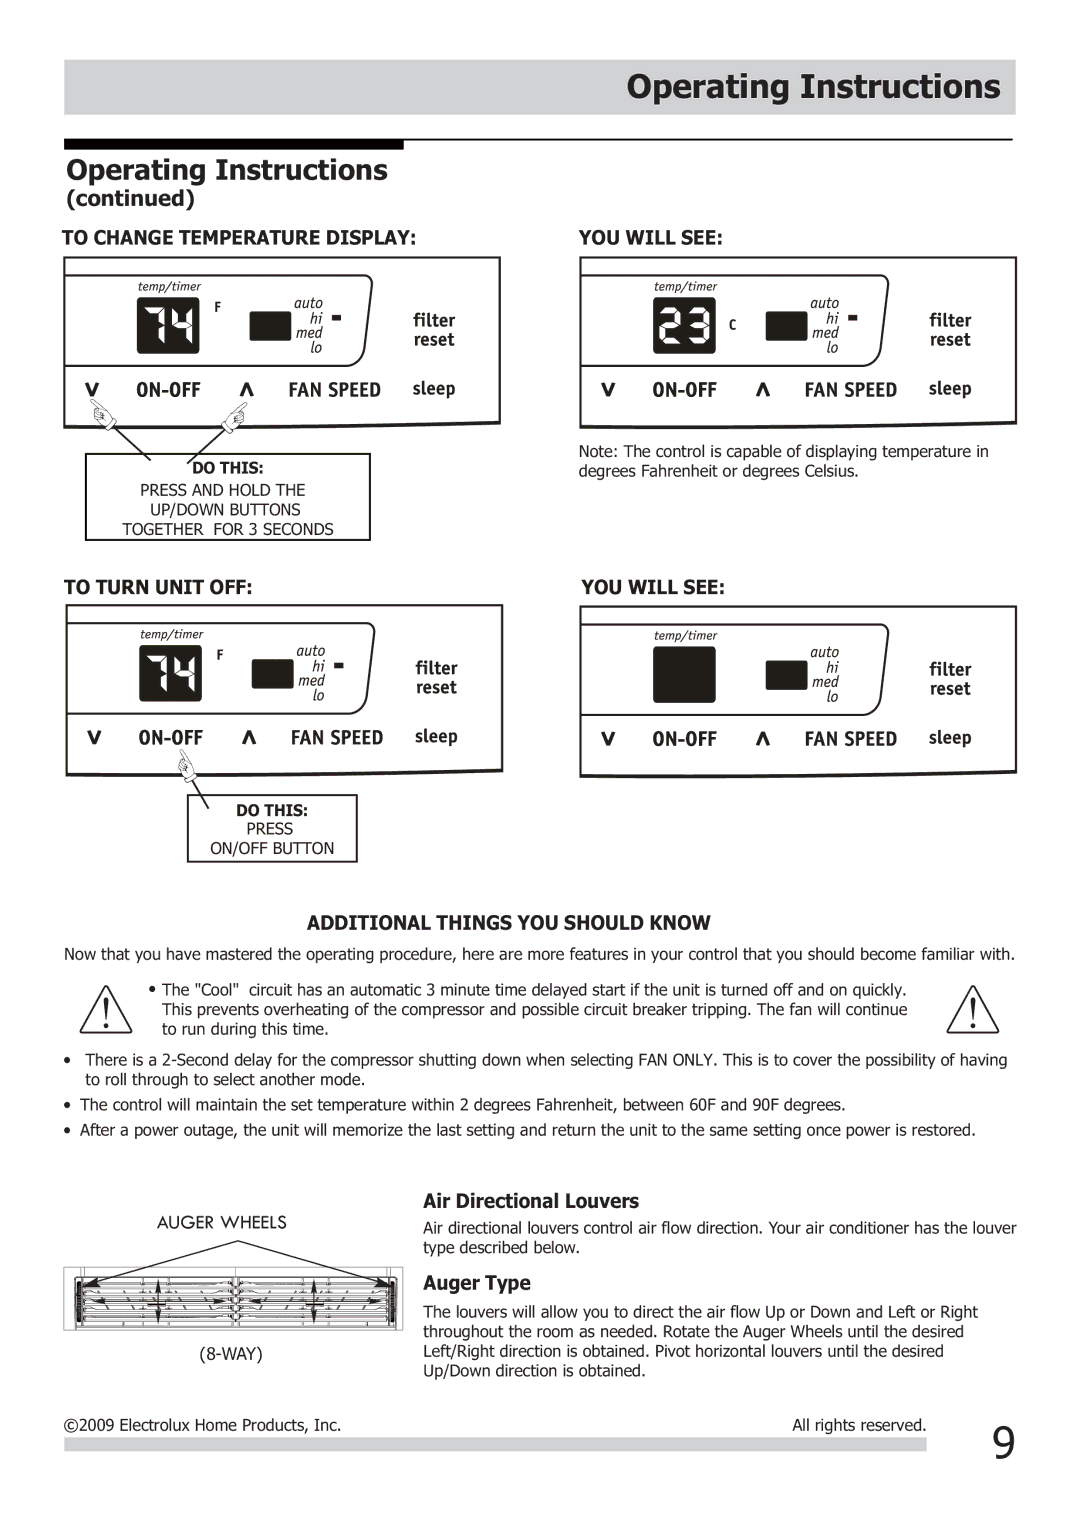 Frigidaire FRA064VU1 important safety instructions To Change Temperature Display, Additional Things YOU should Know 